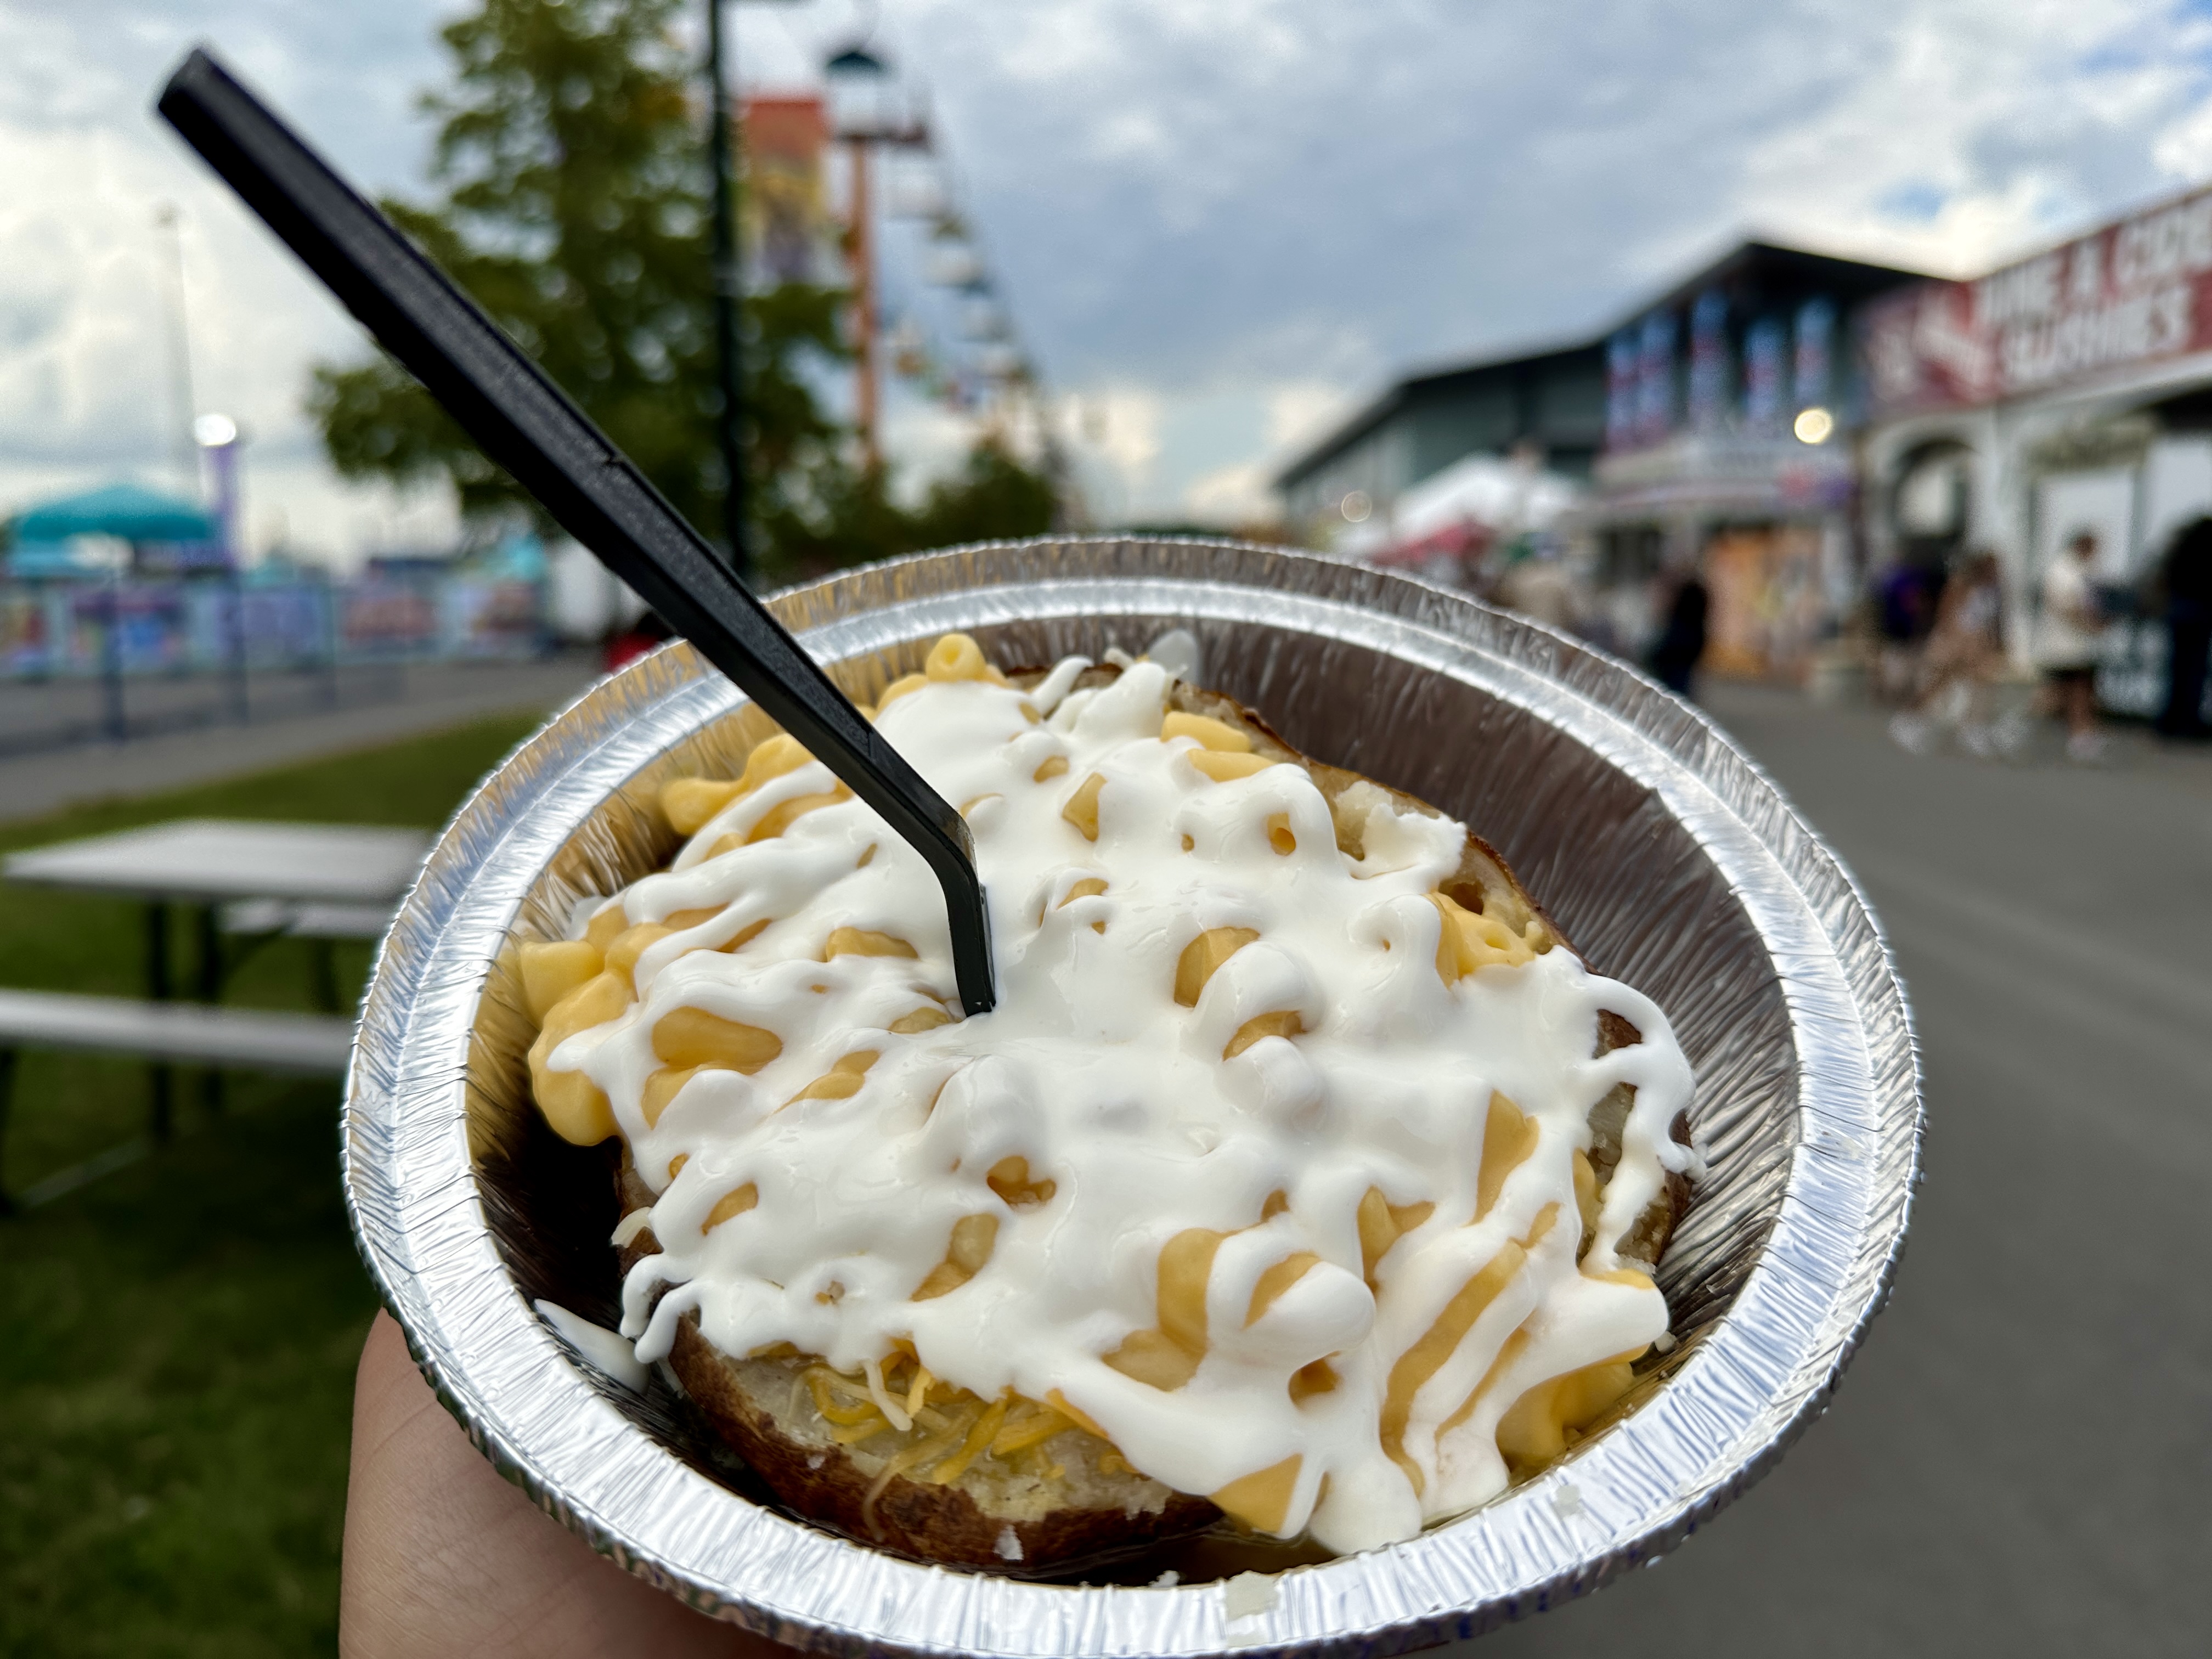 Oven Fresh Baked Potatoes at the 2023 NYS Fair. Mac Baked potato with butter and macaroni and cheese and sour cream. Sunny Hernandez | ahernandez@nyup.com